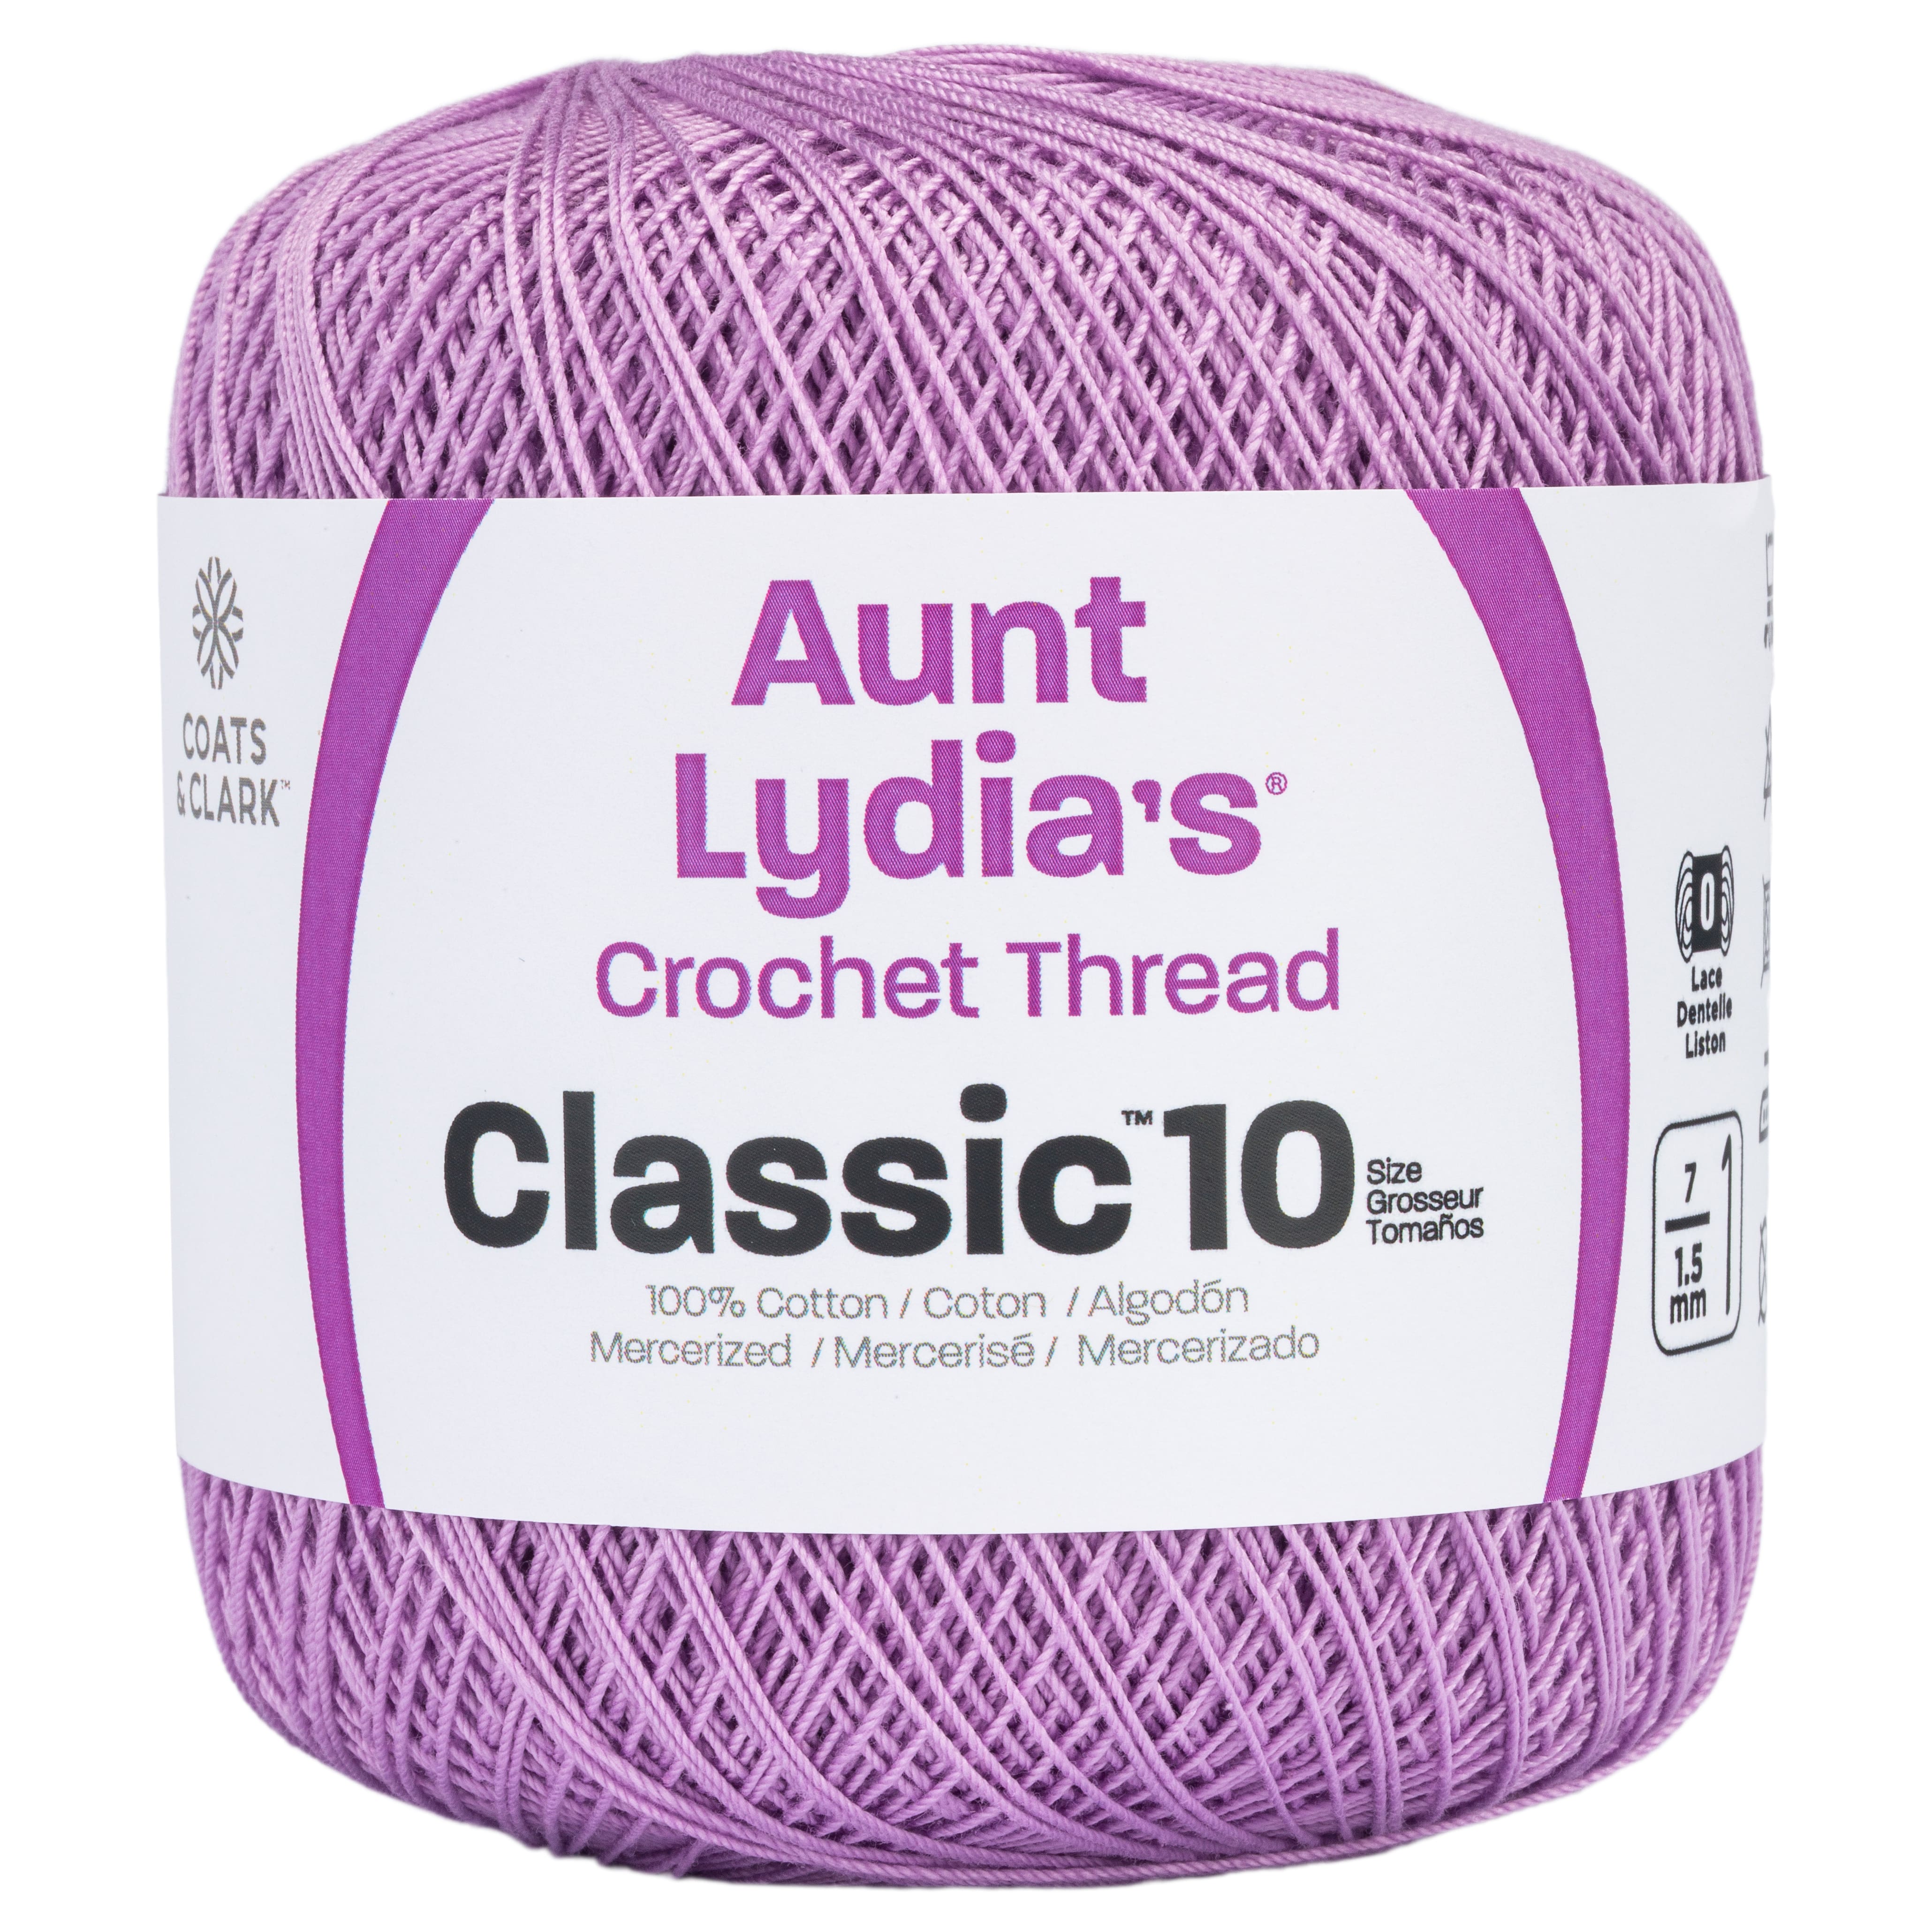 Knitting samples with Aunt Lydia's Classic 10 crochet thread